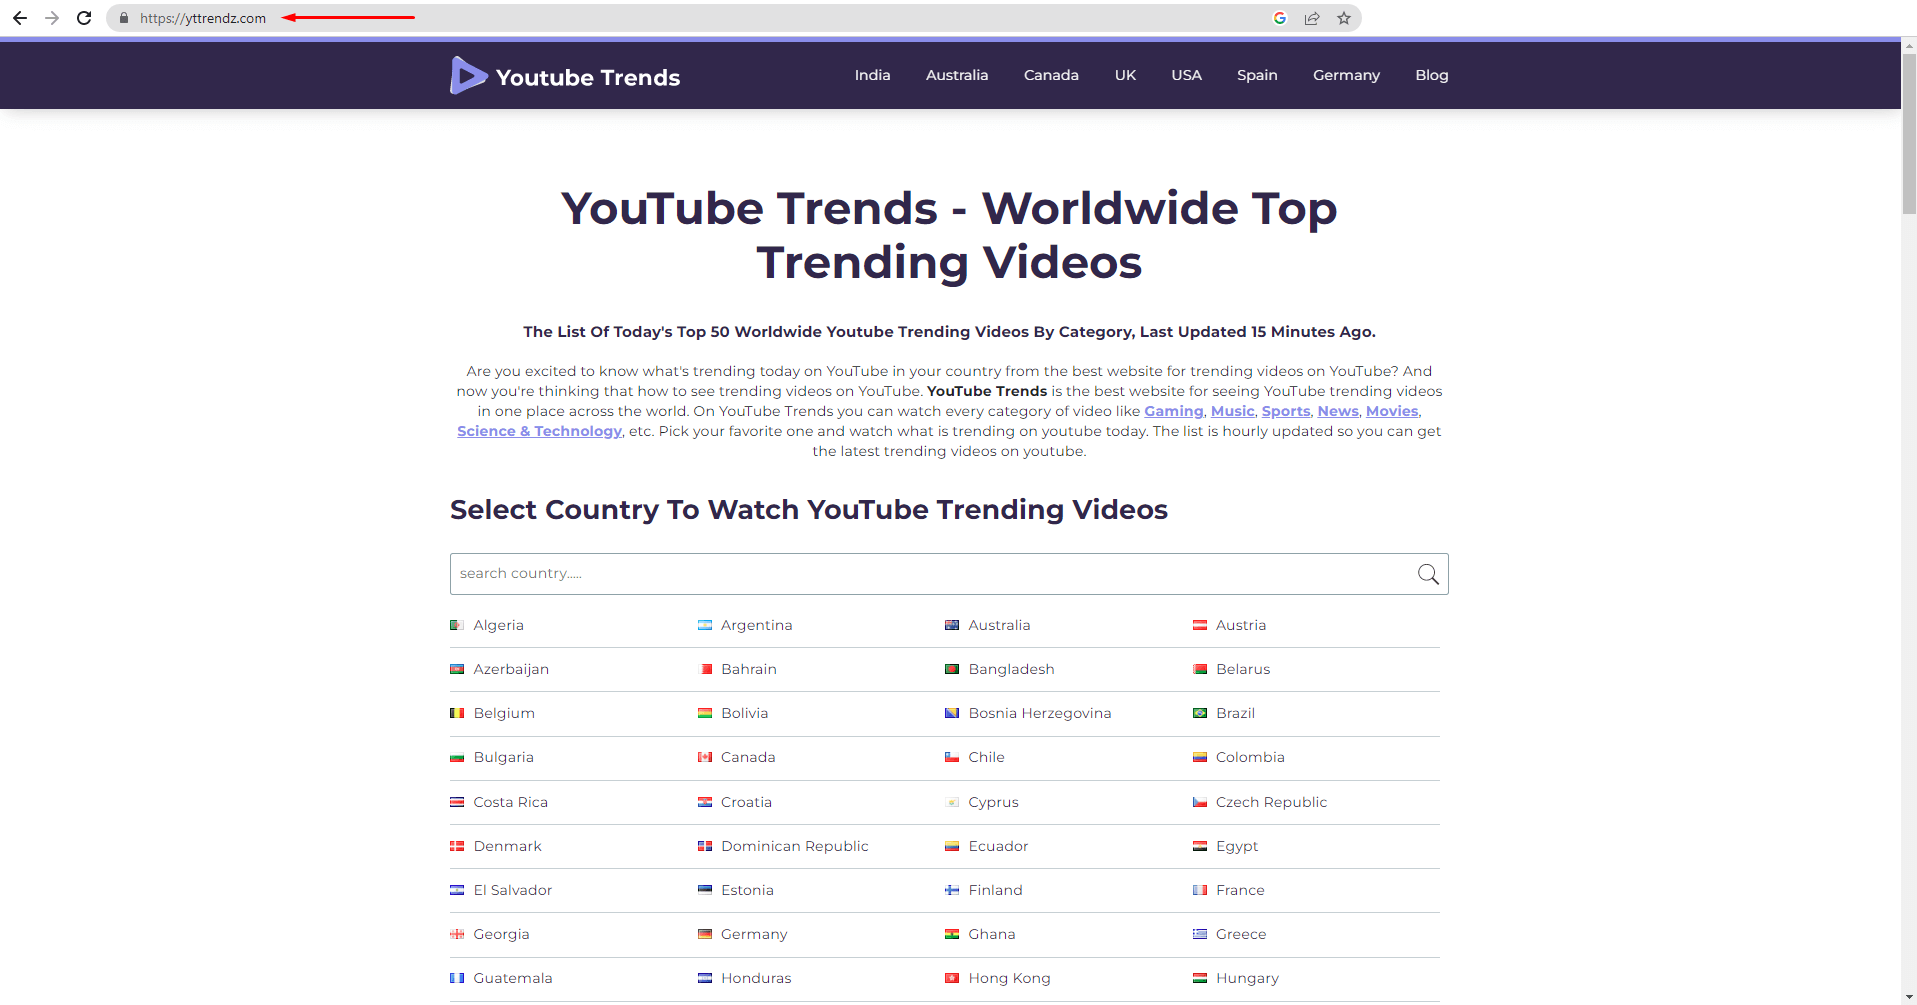 YouTube Trends Website, here you can find worldwide YouTube trending videos